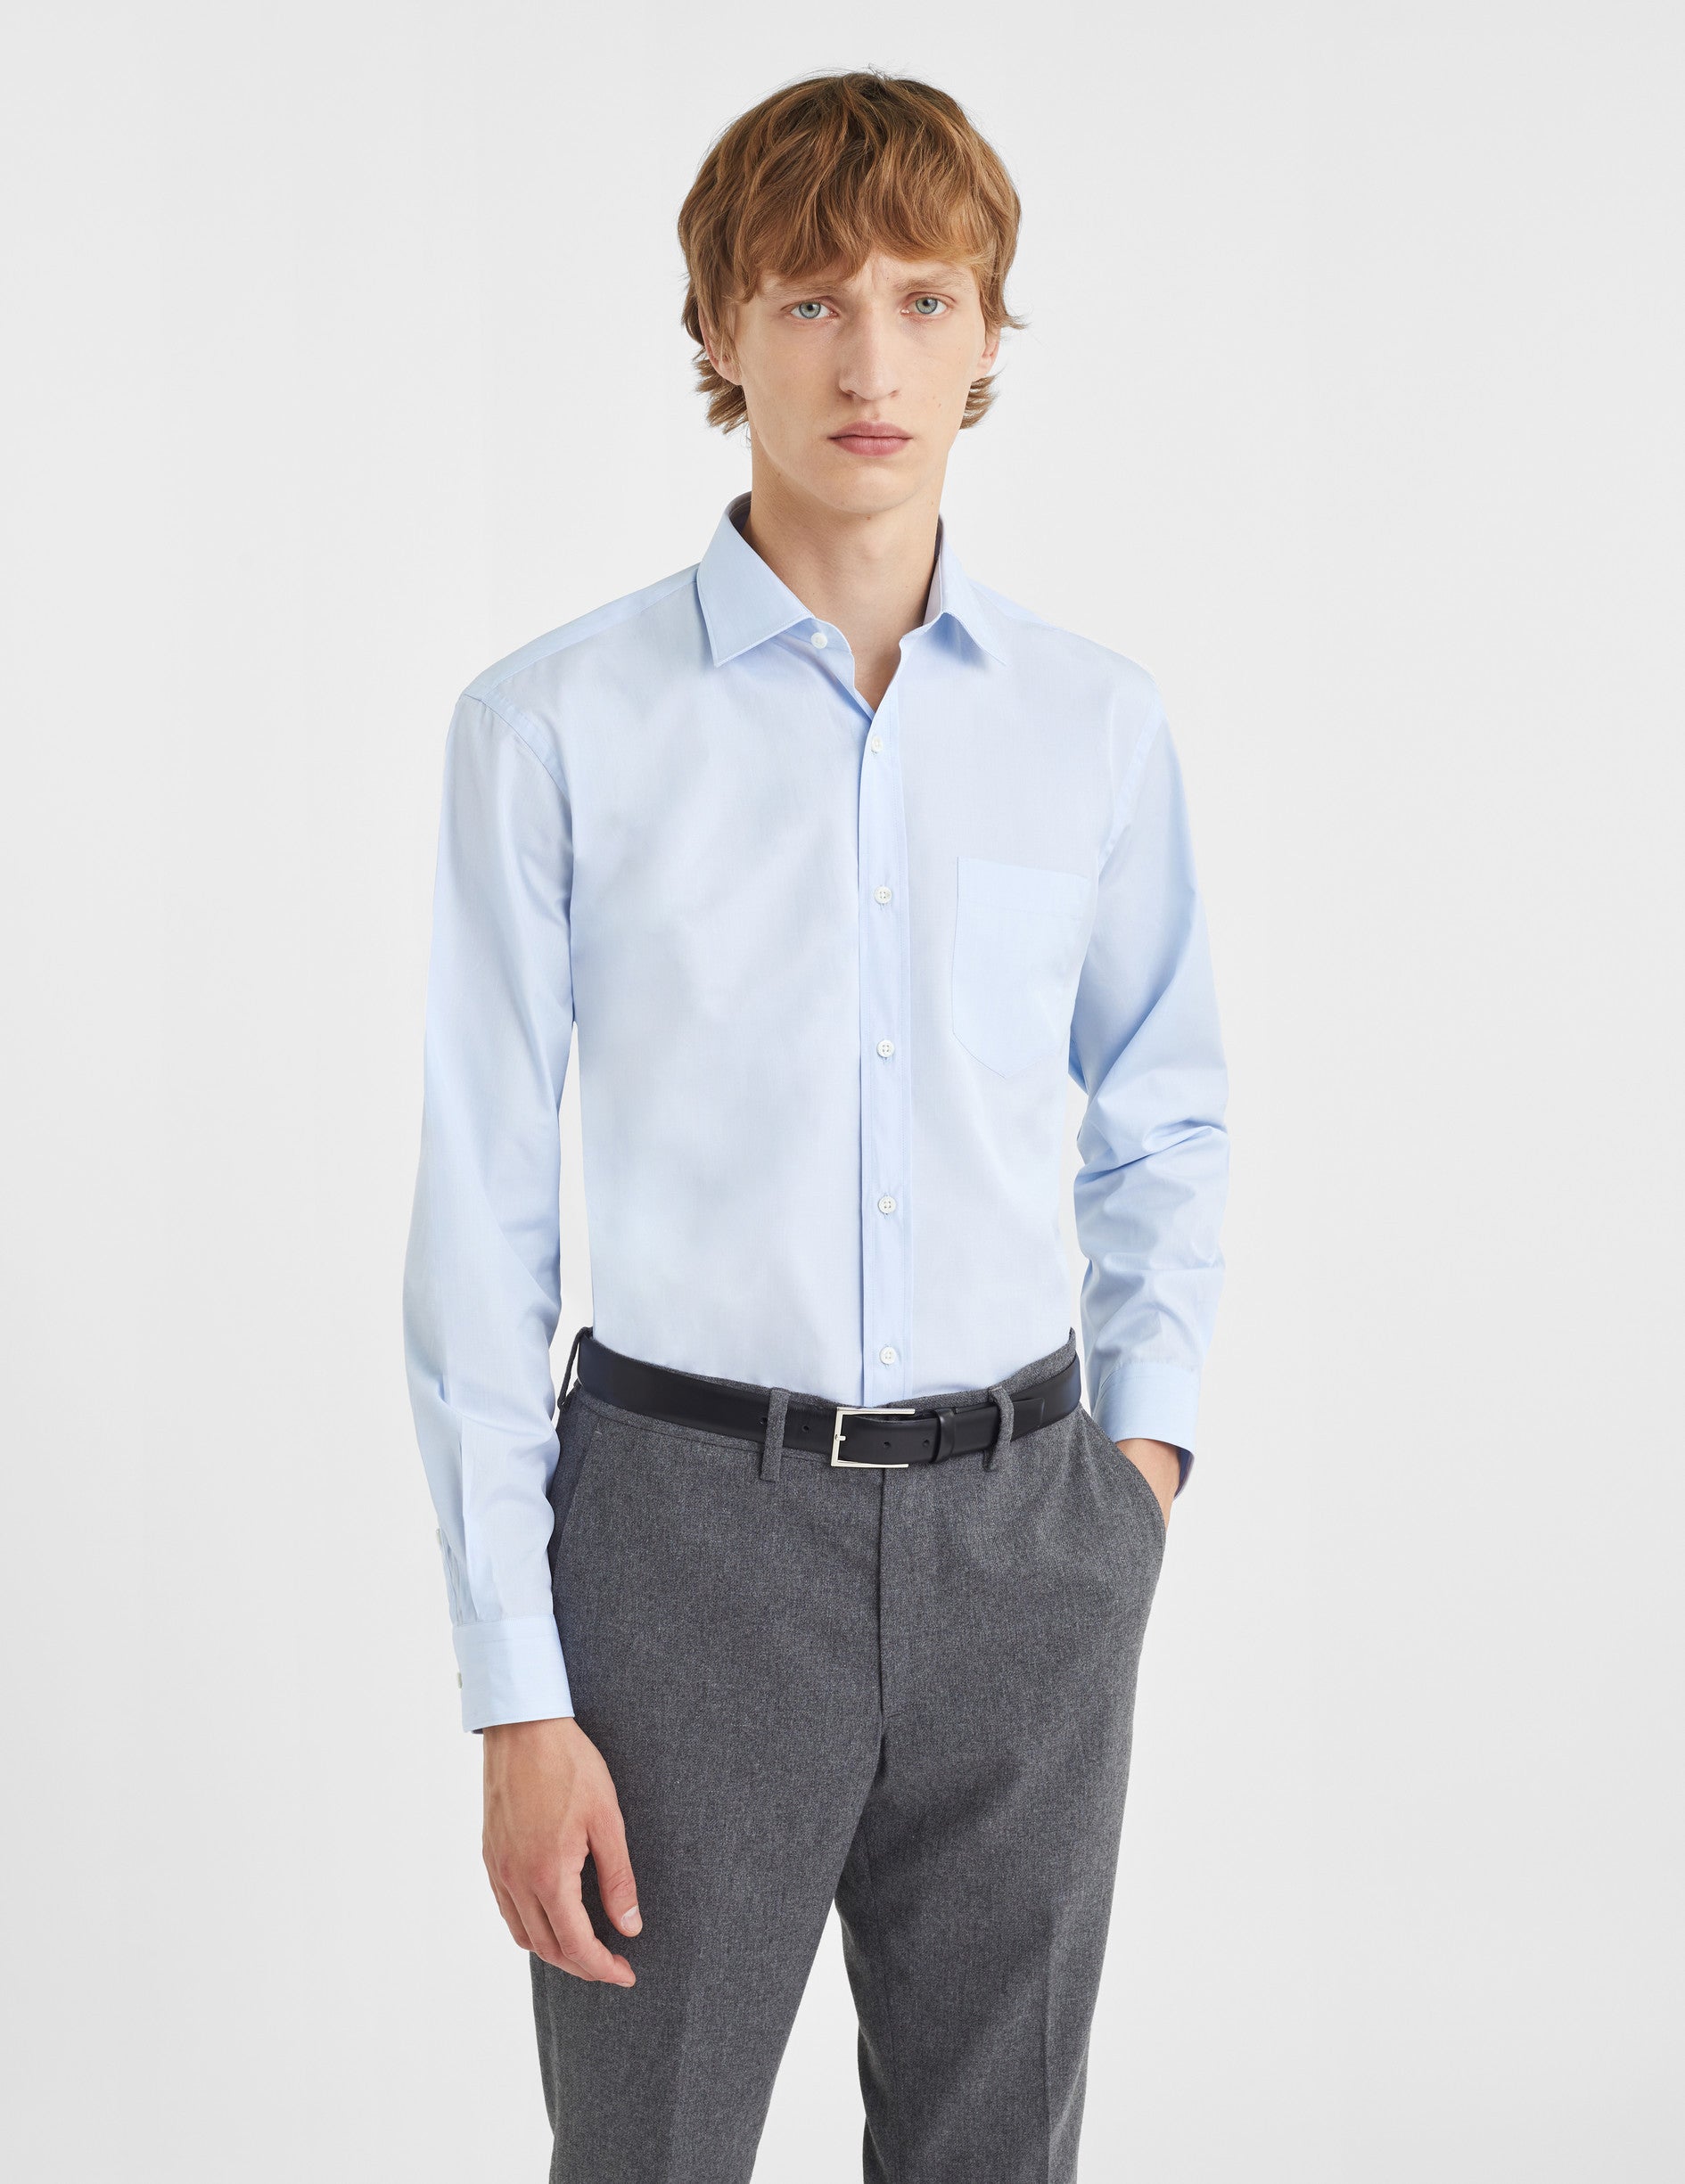 Classic blue shirt - Wire to wire - Figaret Collar